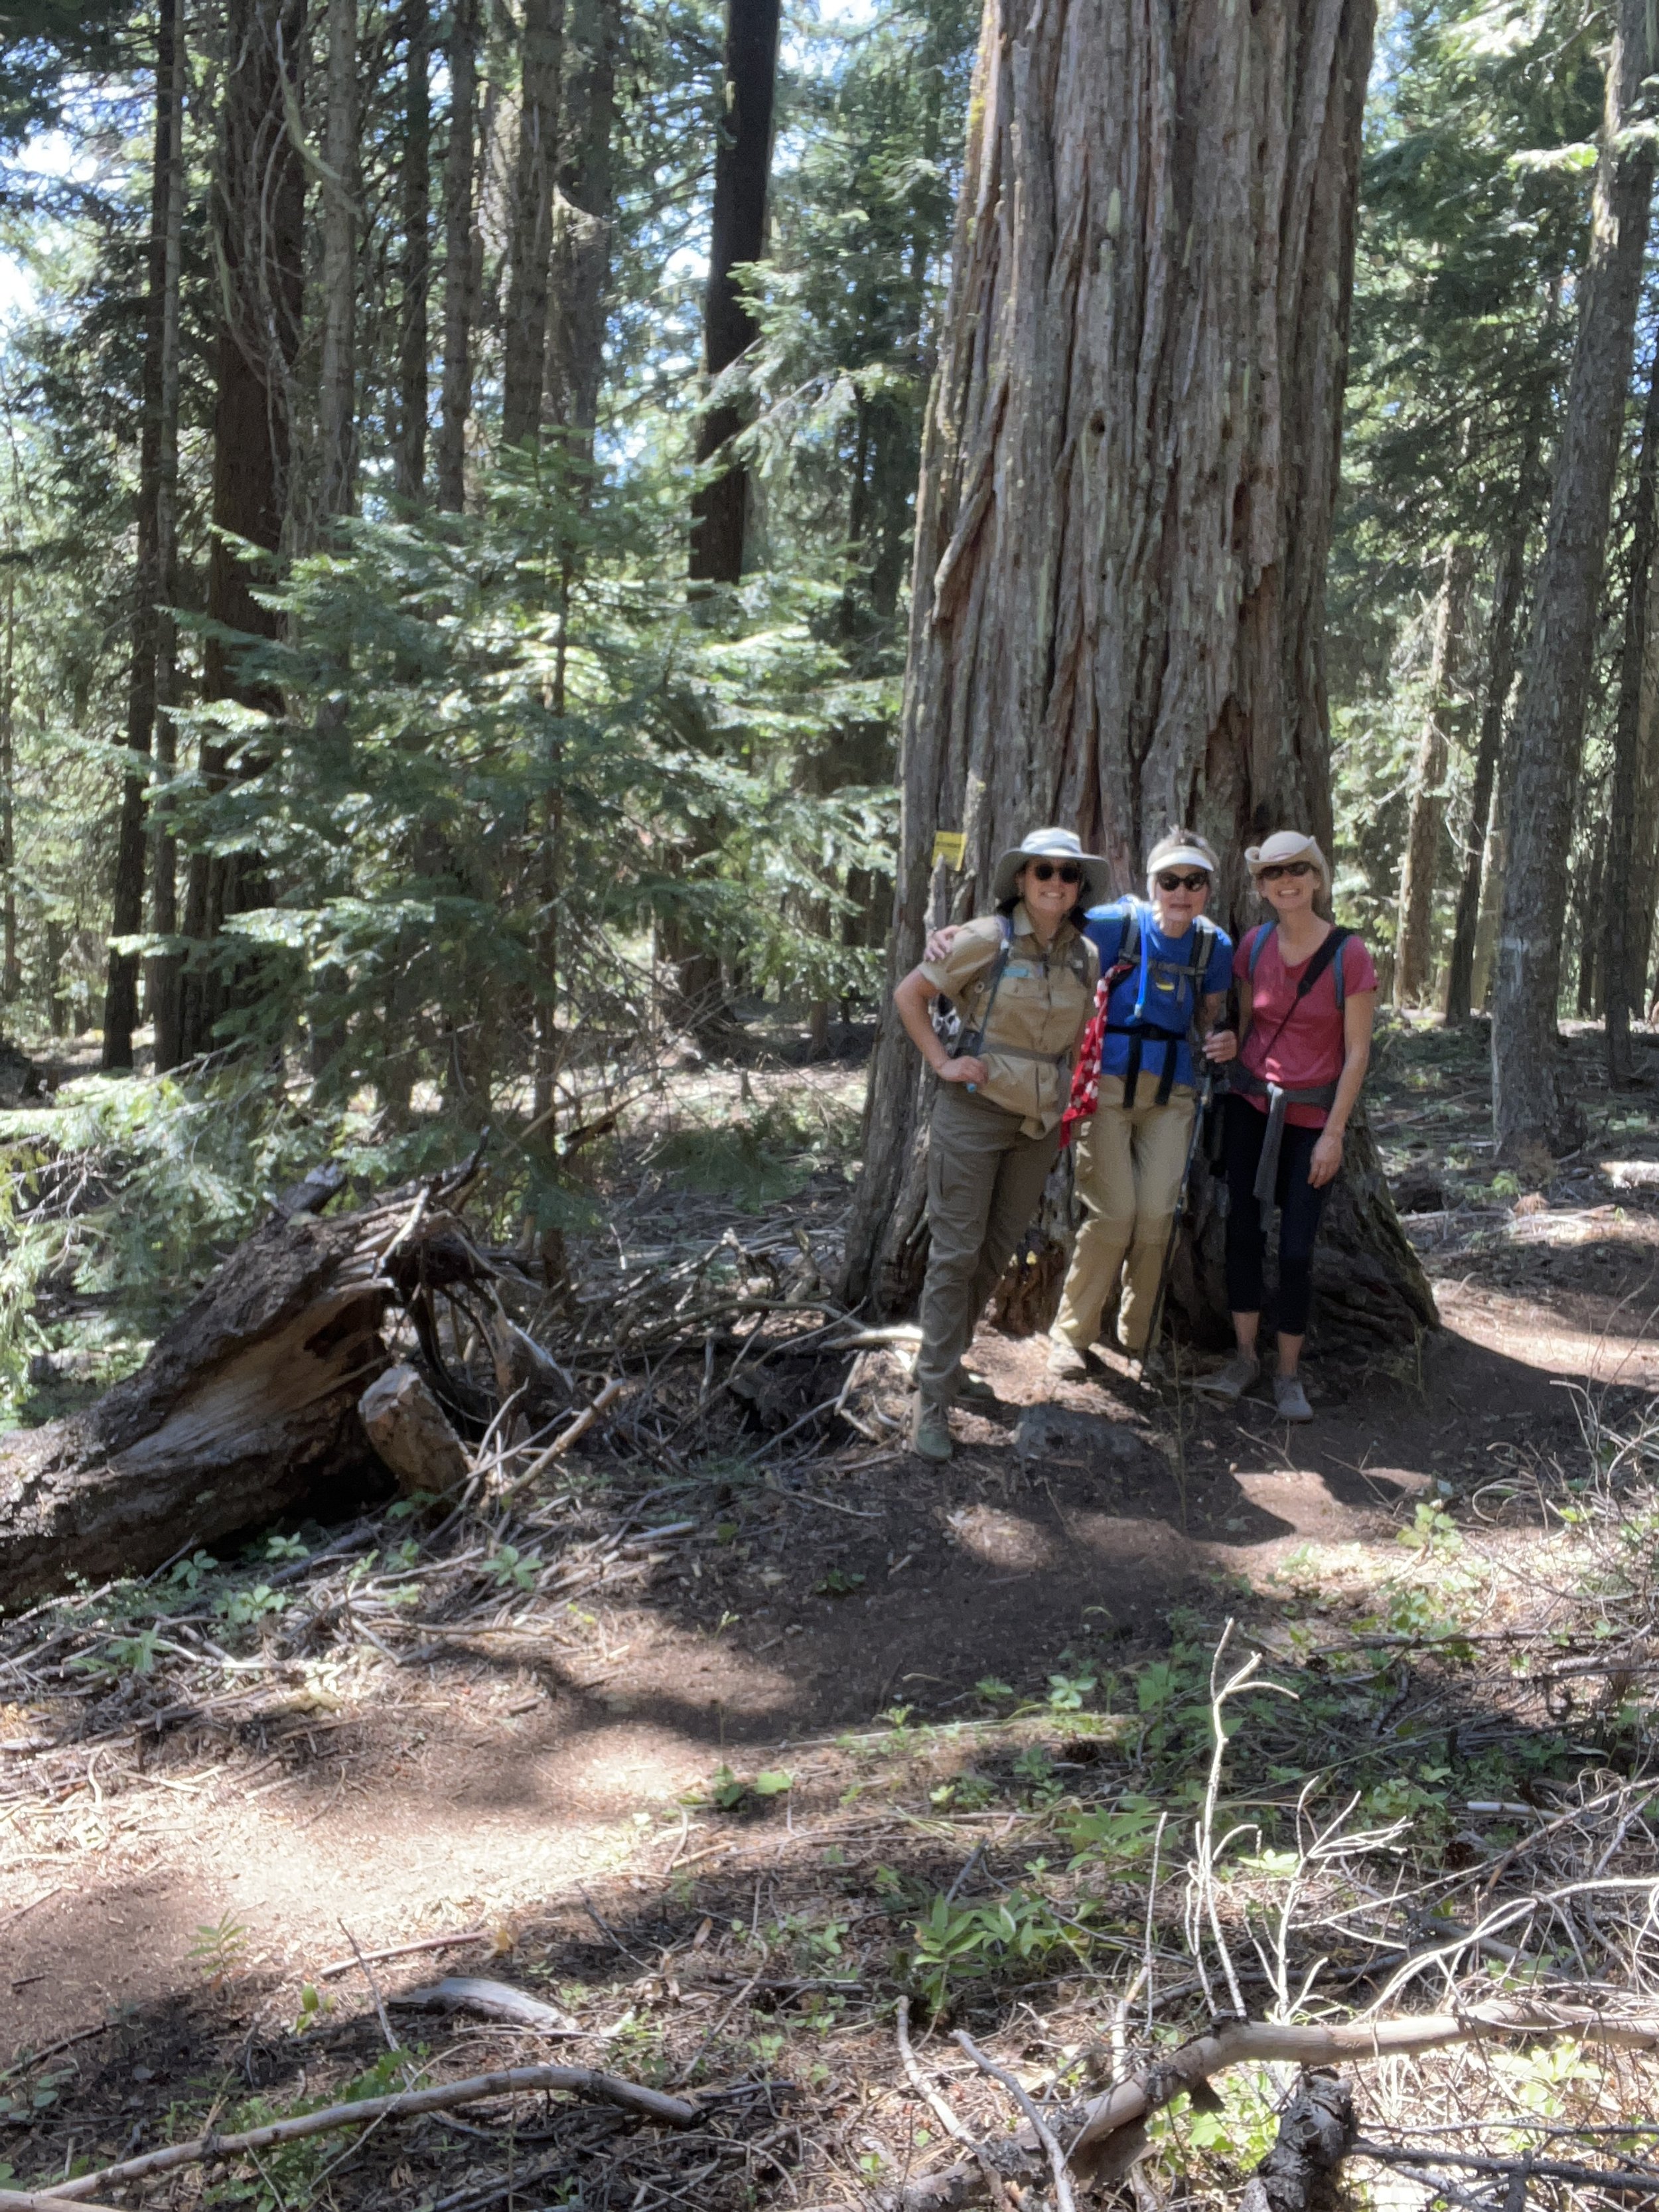  The hiking group by an old-growth tree 